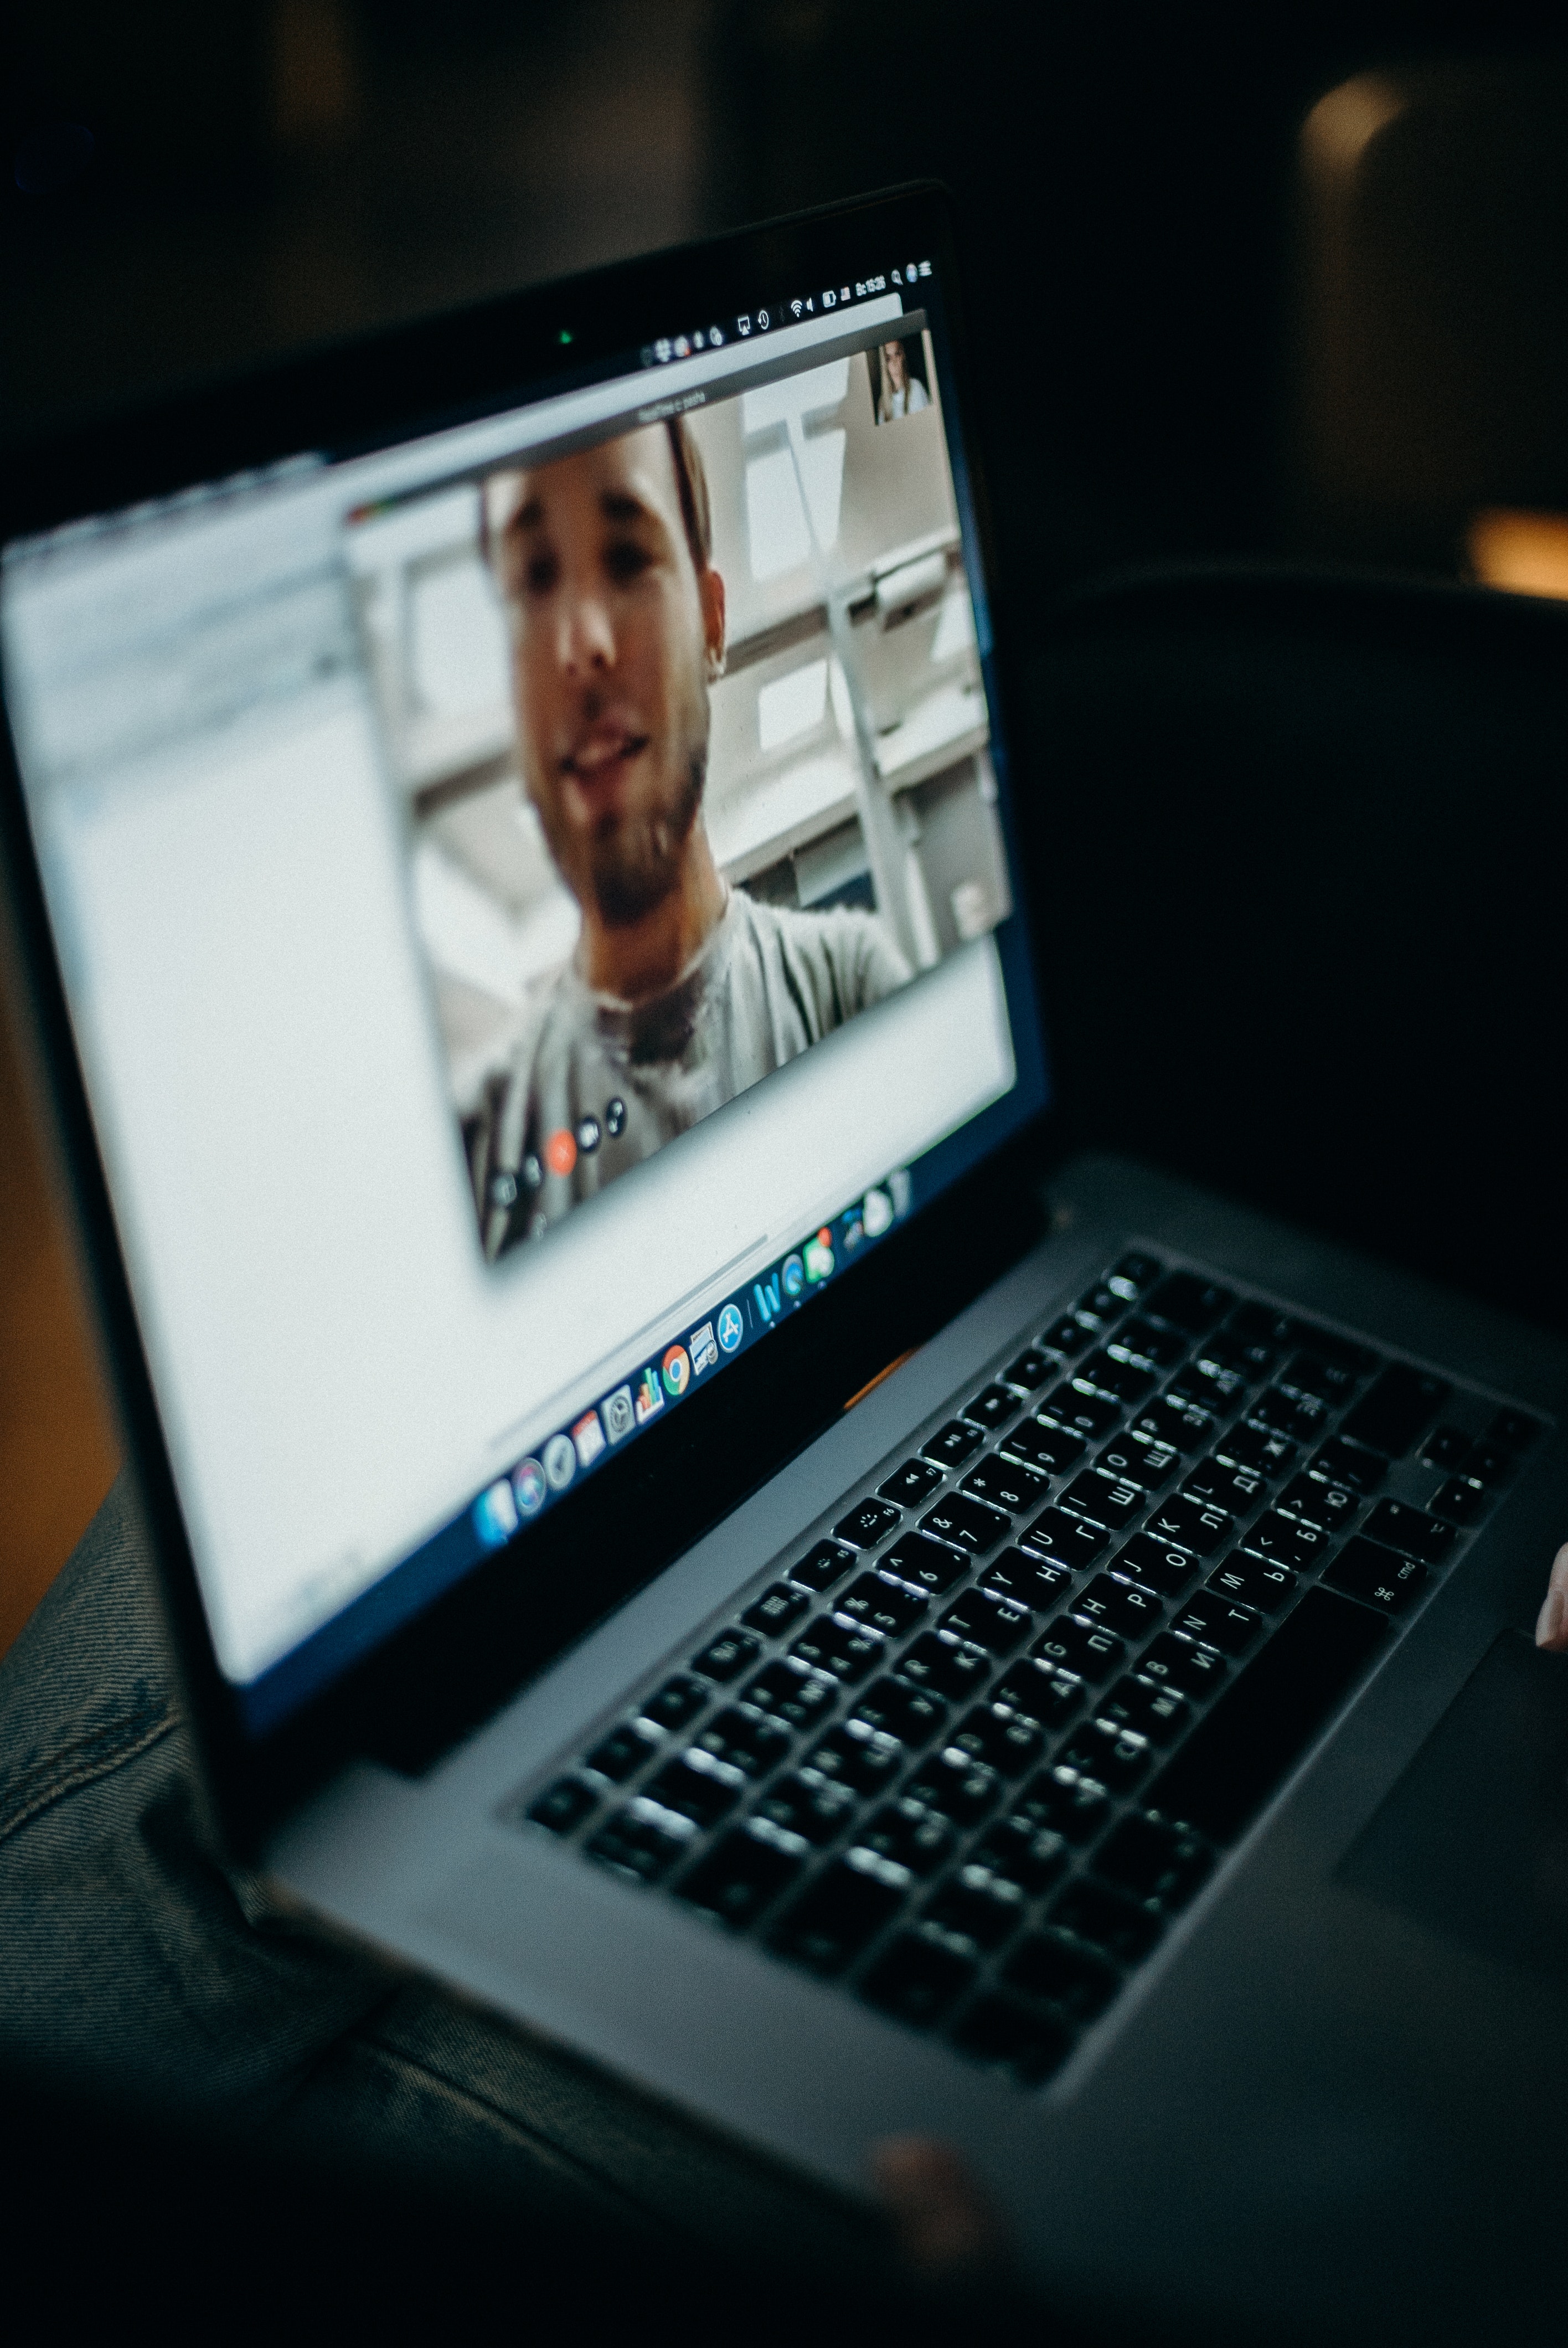 A silver MacBook with black keys displays a video call with a young man with short, dark hair.